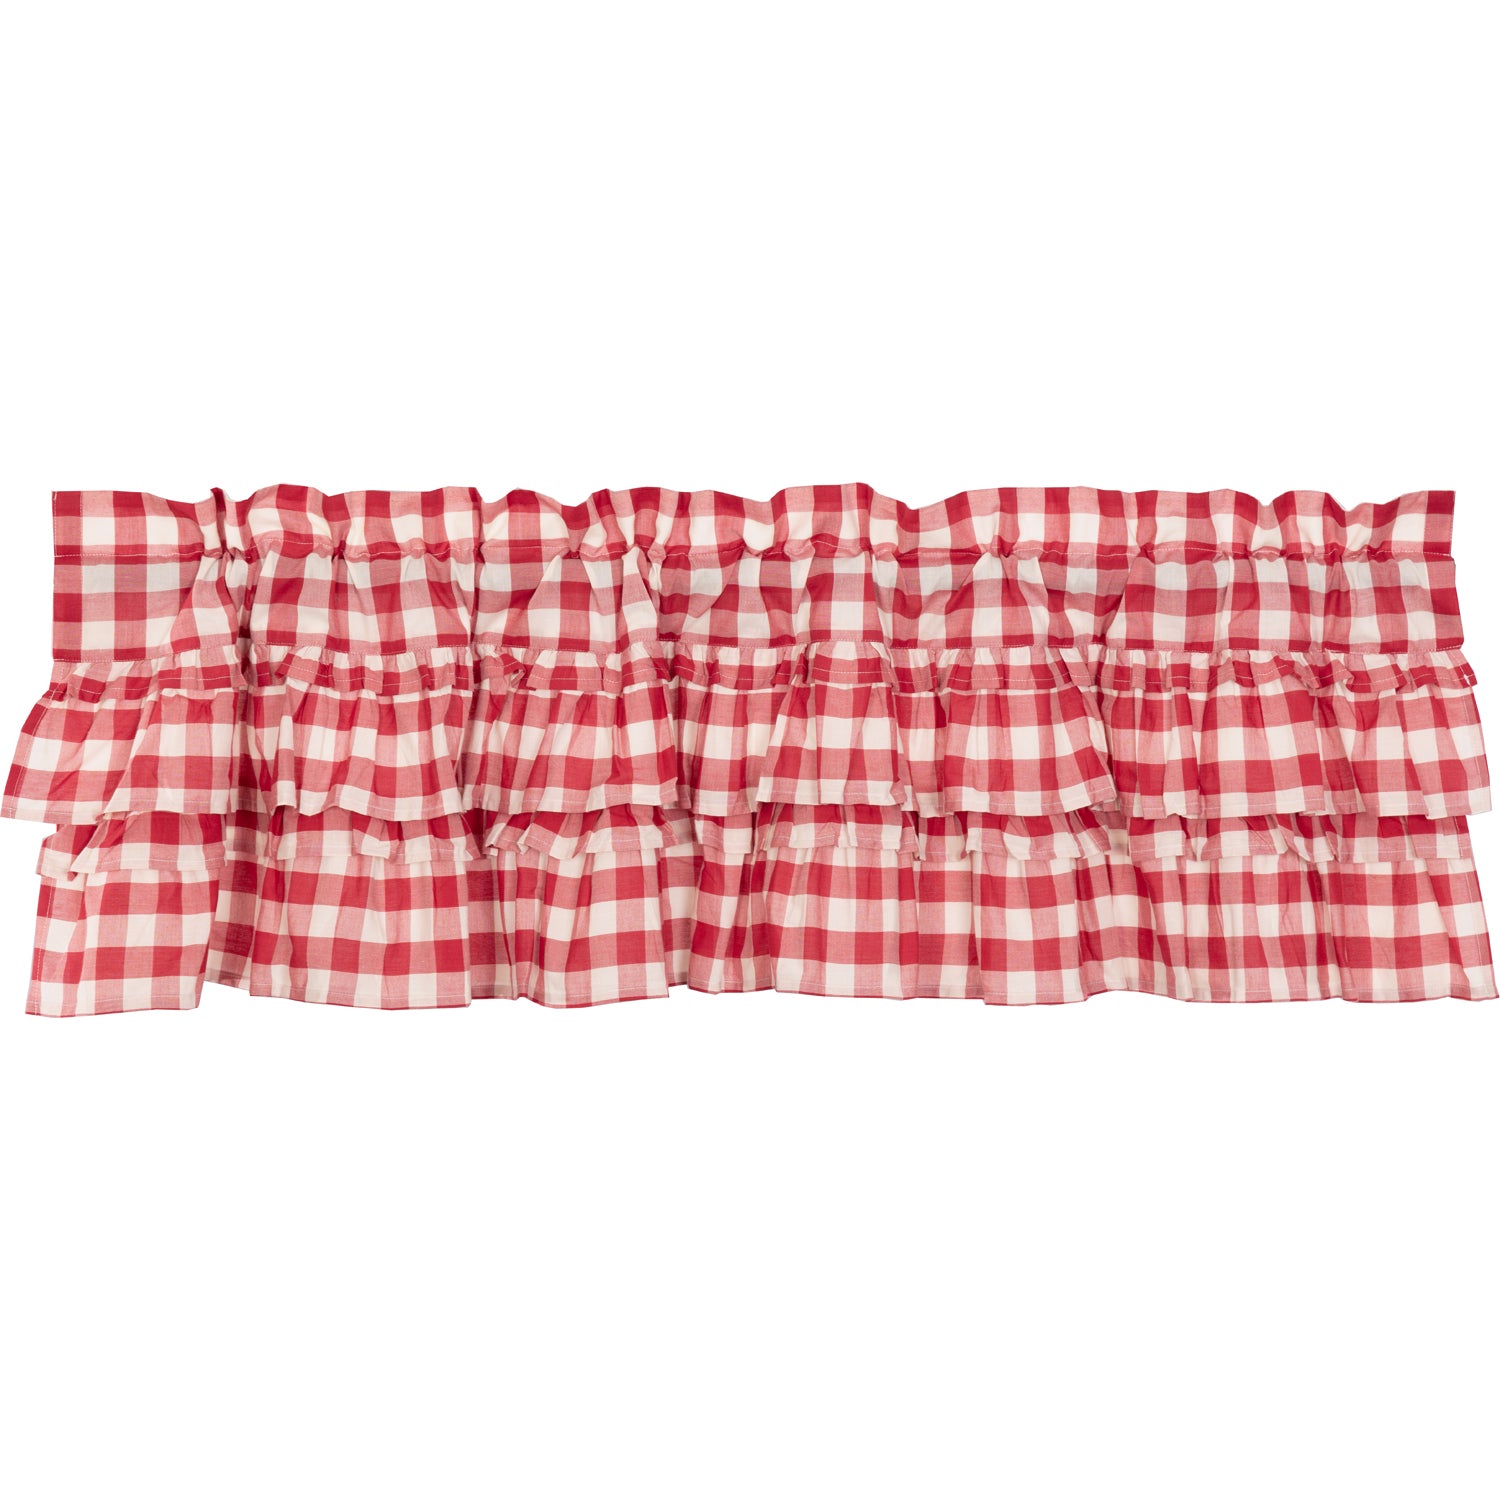 April & Olive Annie Buffalo Red Check Ruffled Valance 16x60 By VHC Brands